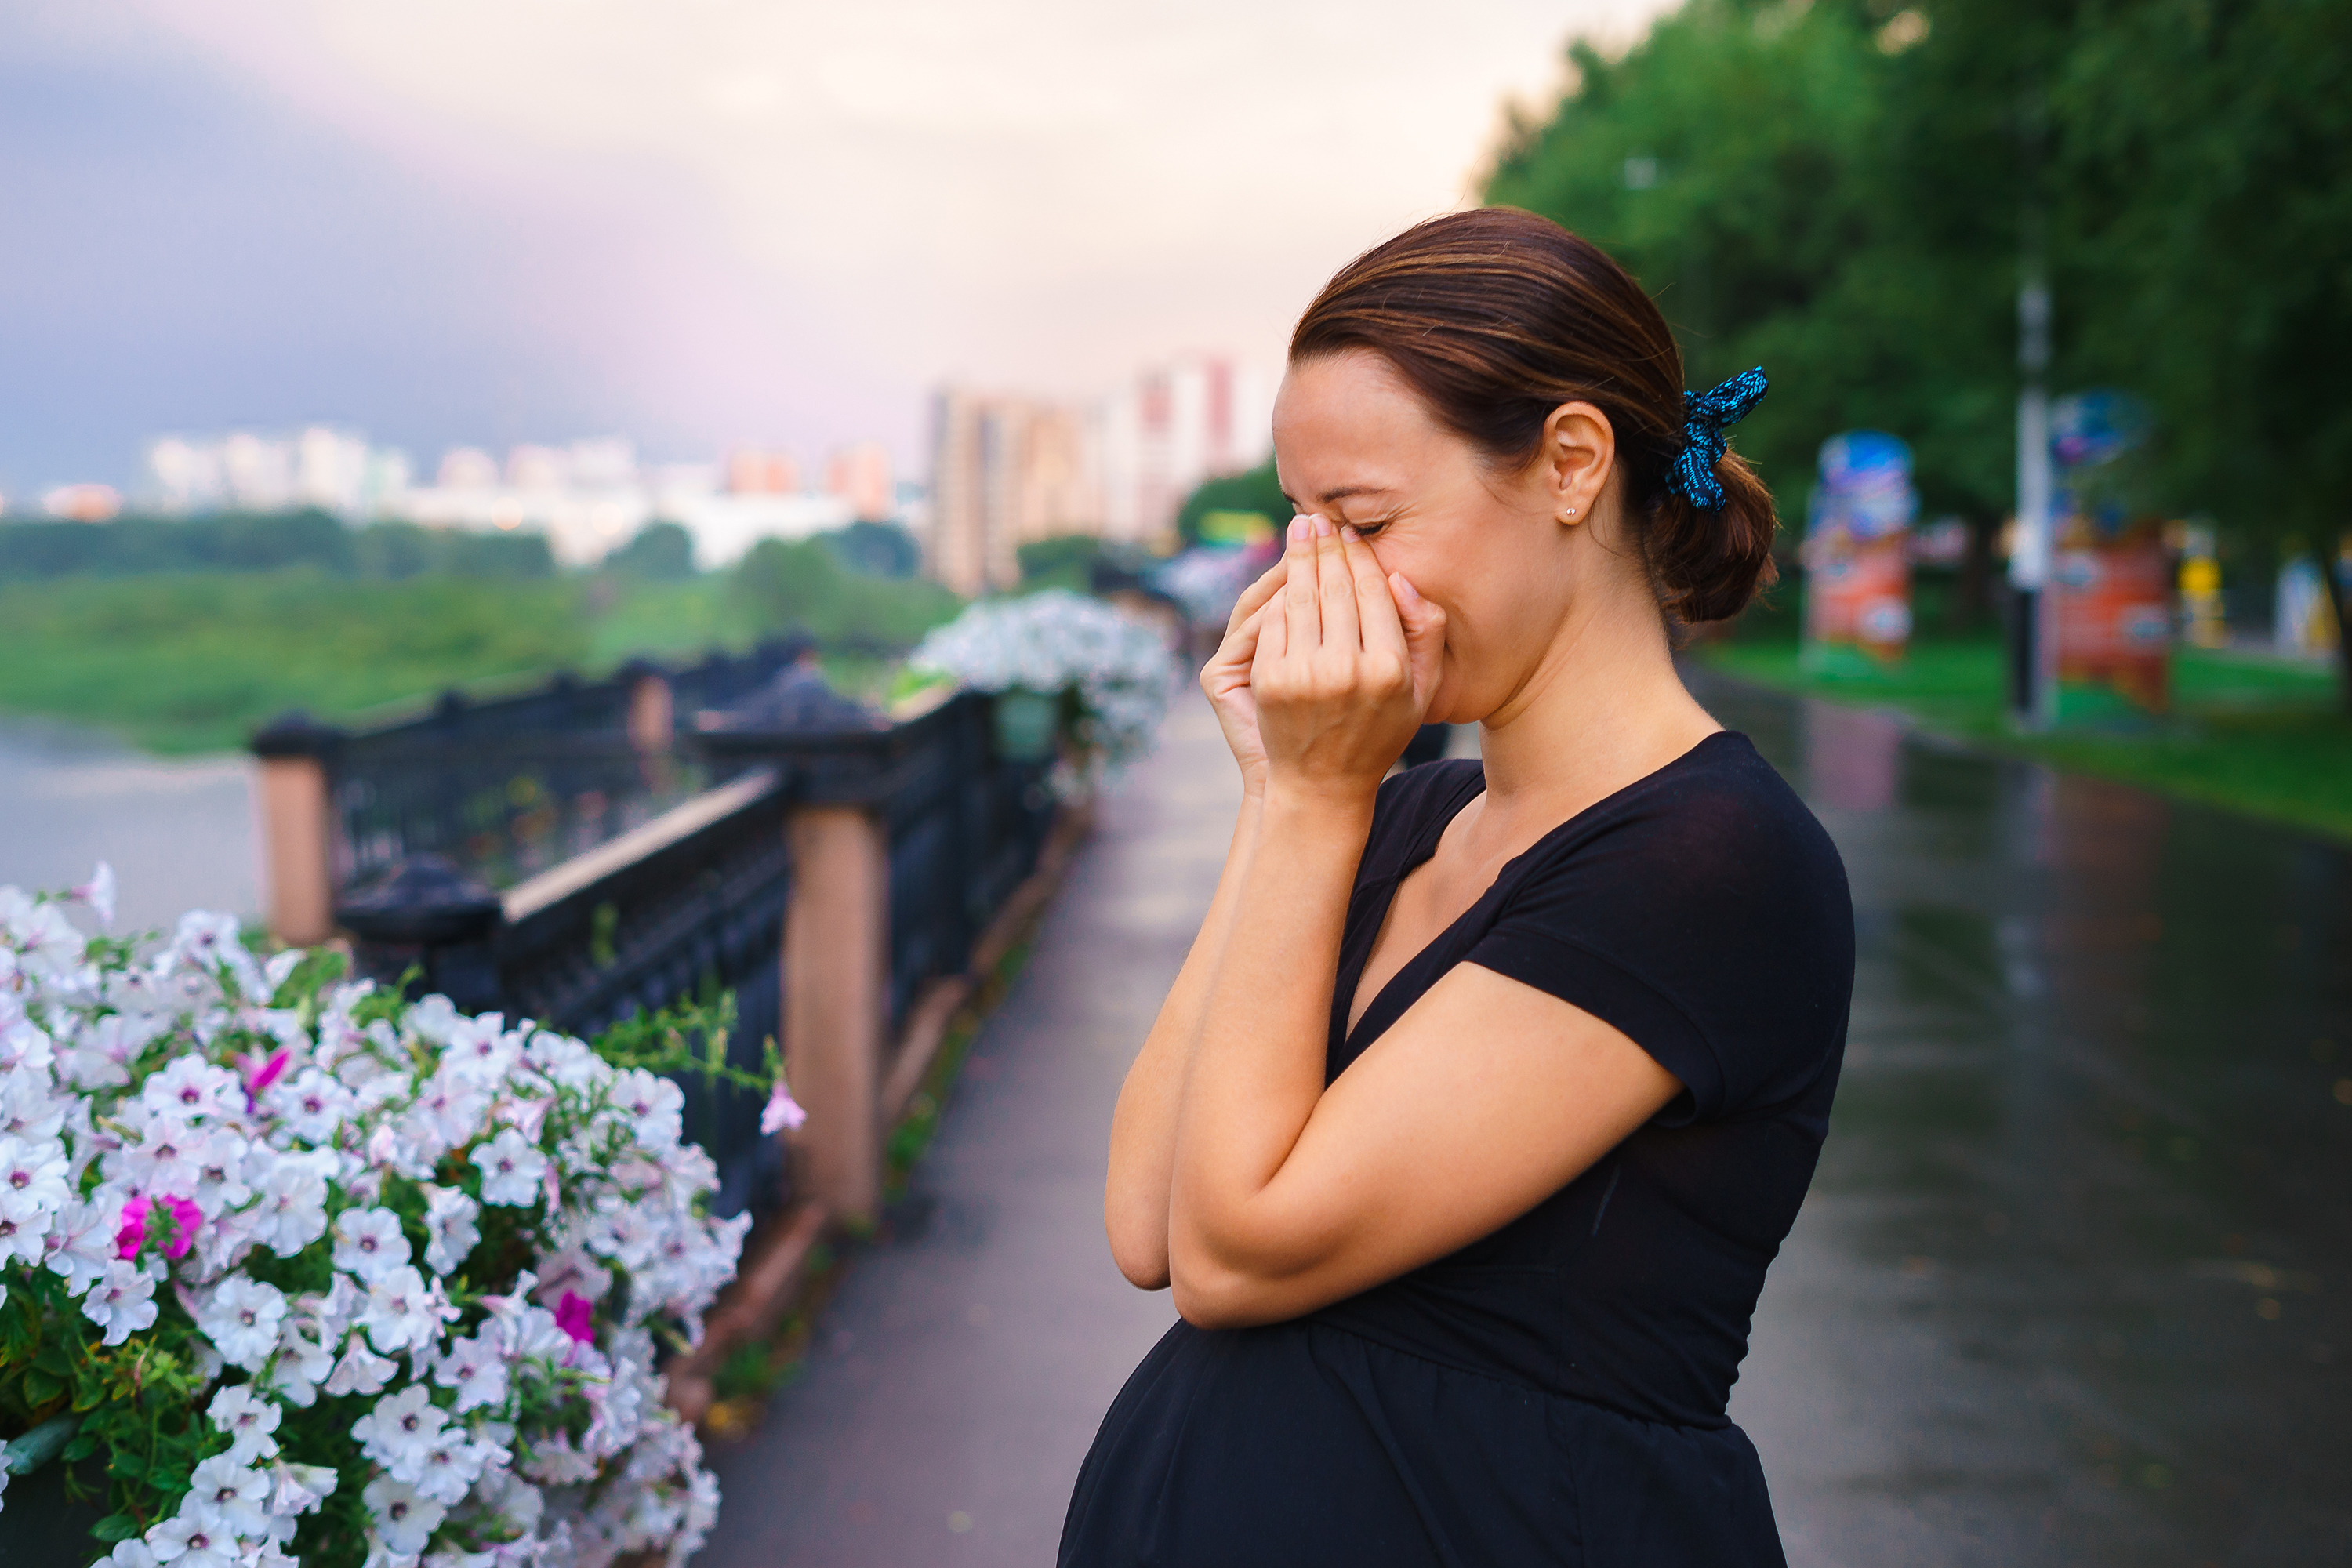 A pregnant woman standing on the quay and crying | Source: Shutterstock